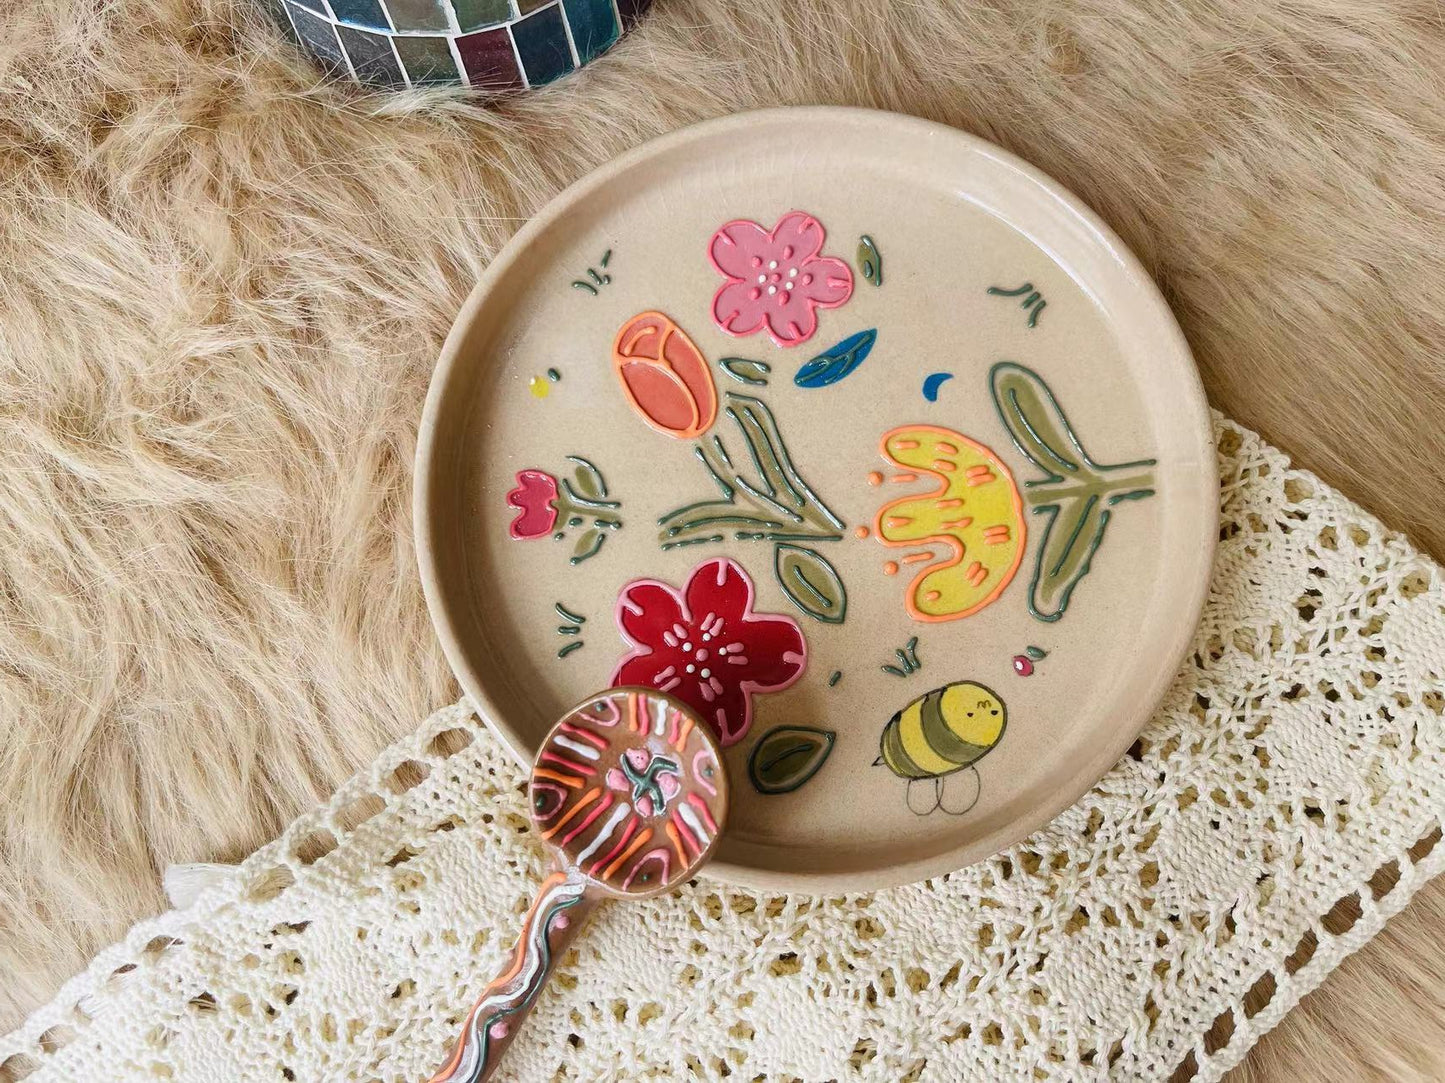 Hand-painted Floral Ceramic Plate, Personalized Handmade Cute Pottery Dinnerware for Gifts